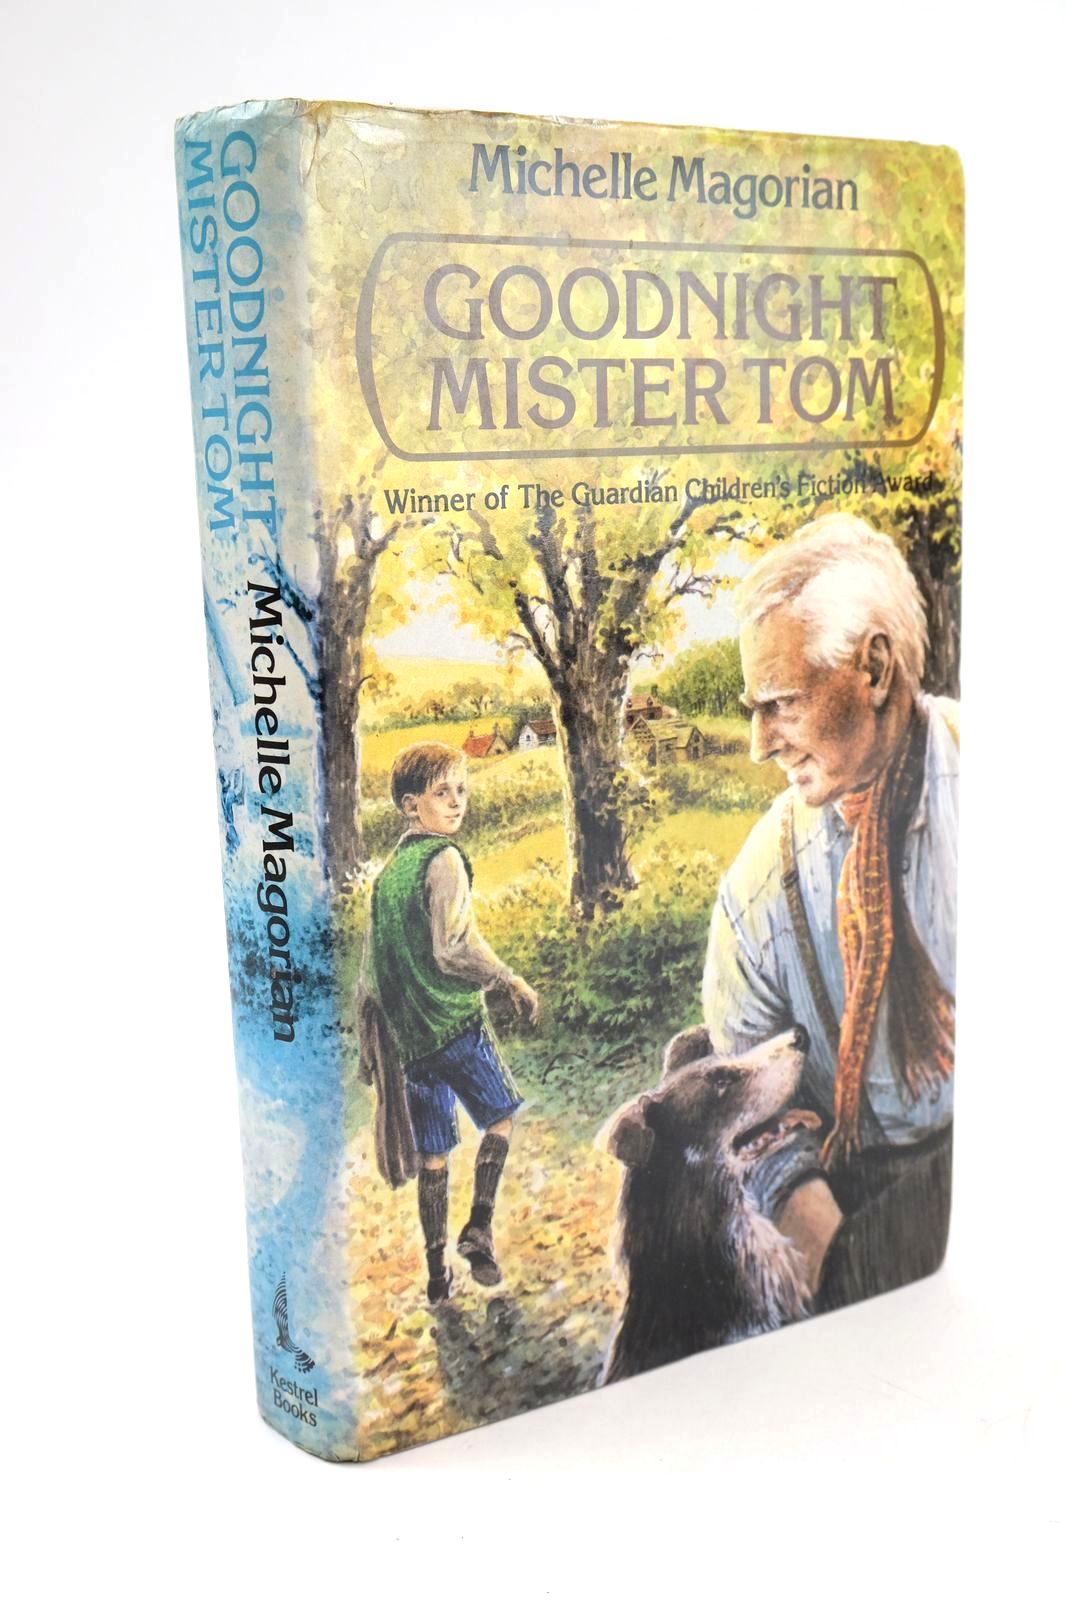 Photo of GOODNIGHT MISTER TOM written by Magorian, Michelle published by Kestrel Books, Penguin Books Ltd (STOCK CODE: 1324802)  for sale by Stella & Rose's Books